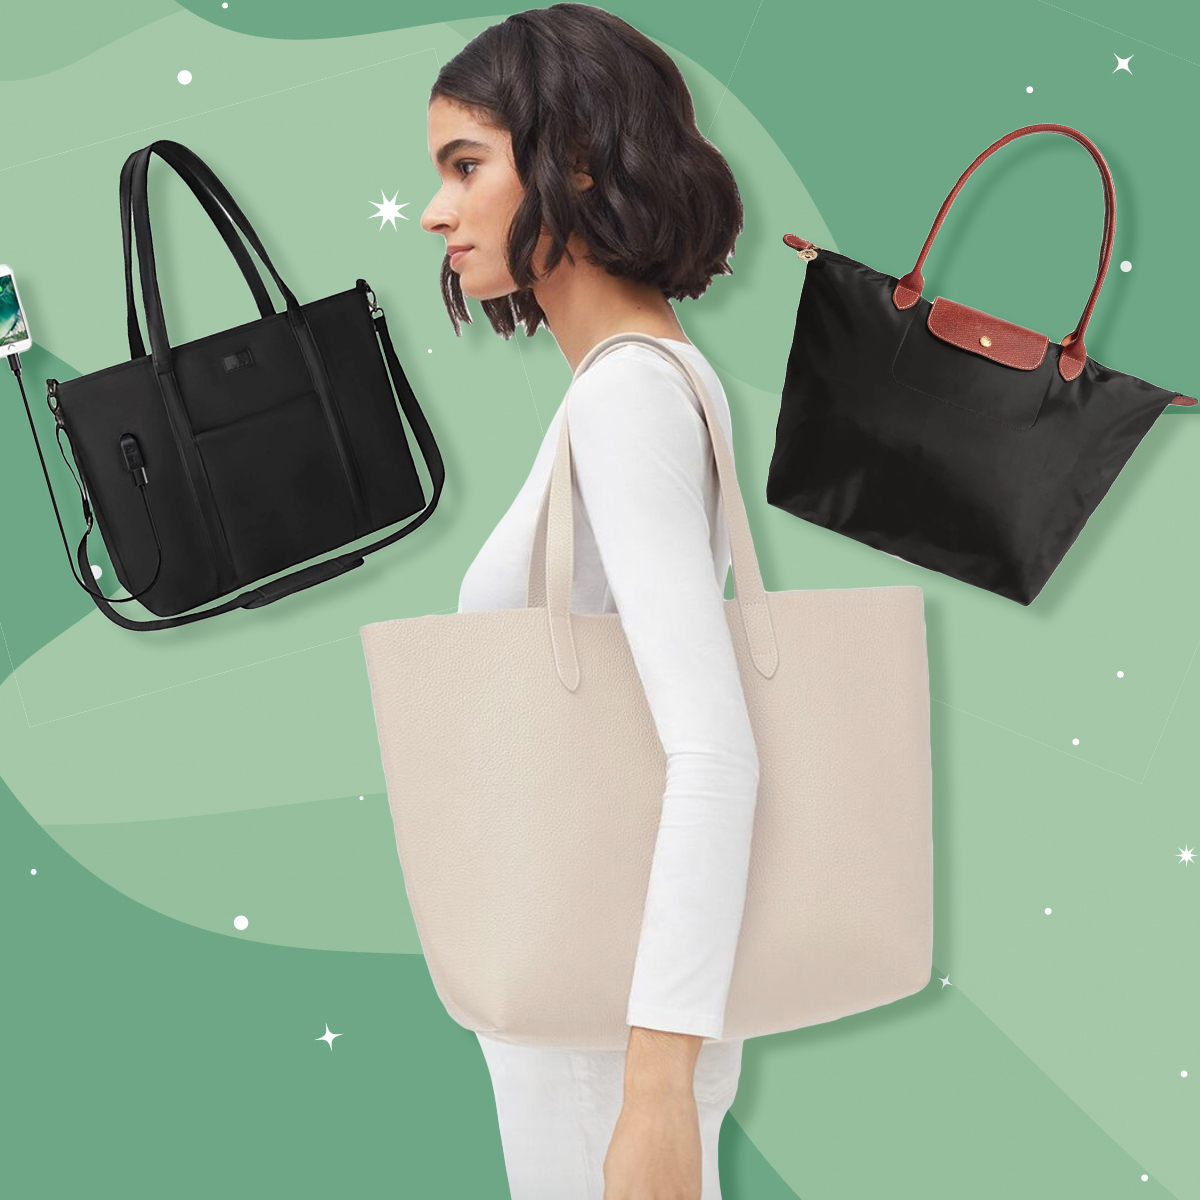 Find the Best Office Tote Bags for Working/Professional Women